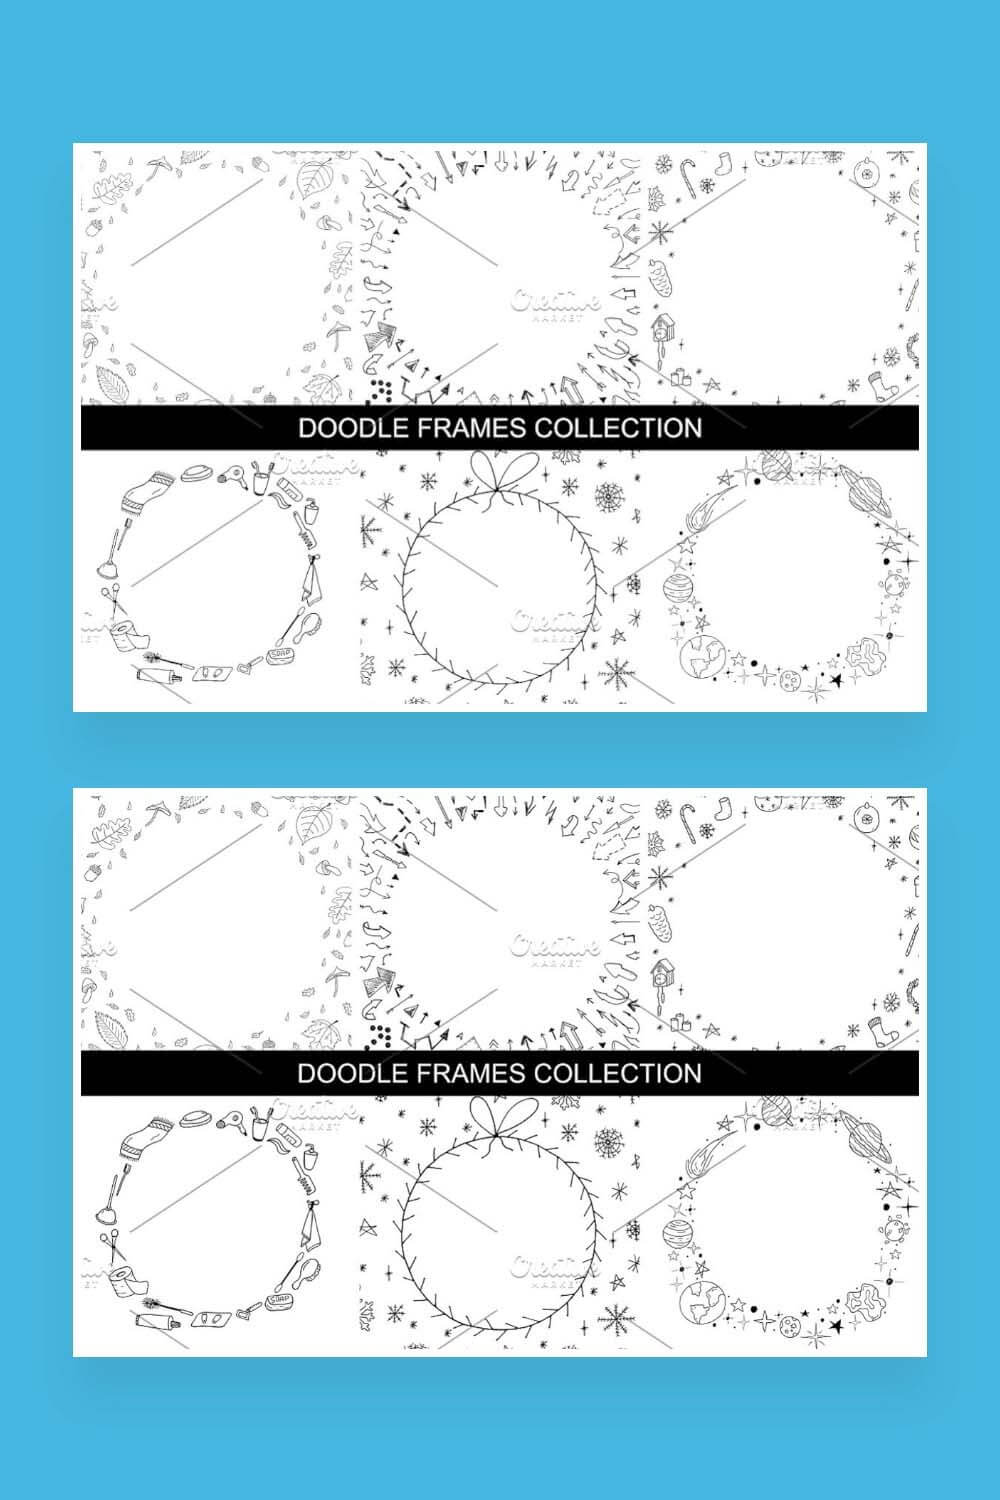 Two drawings with doodle frame collection.